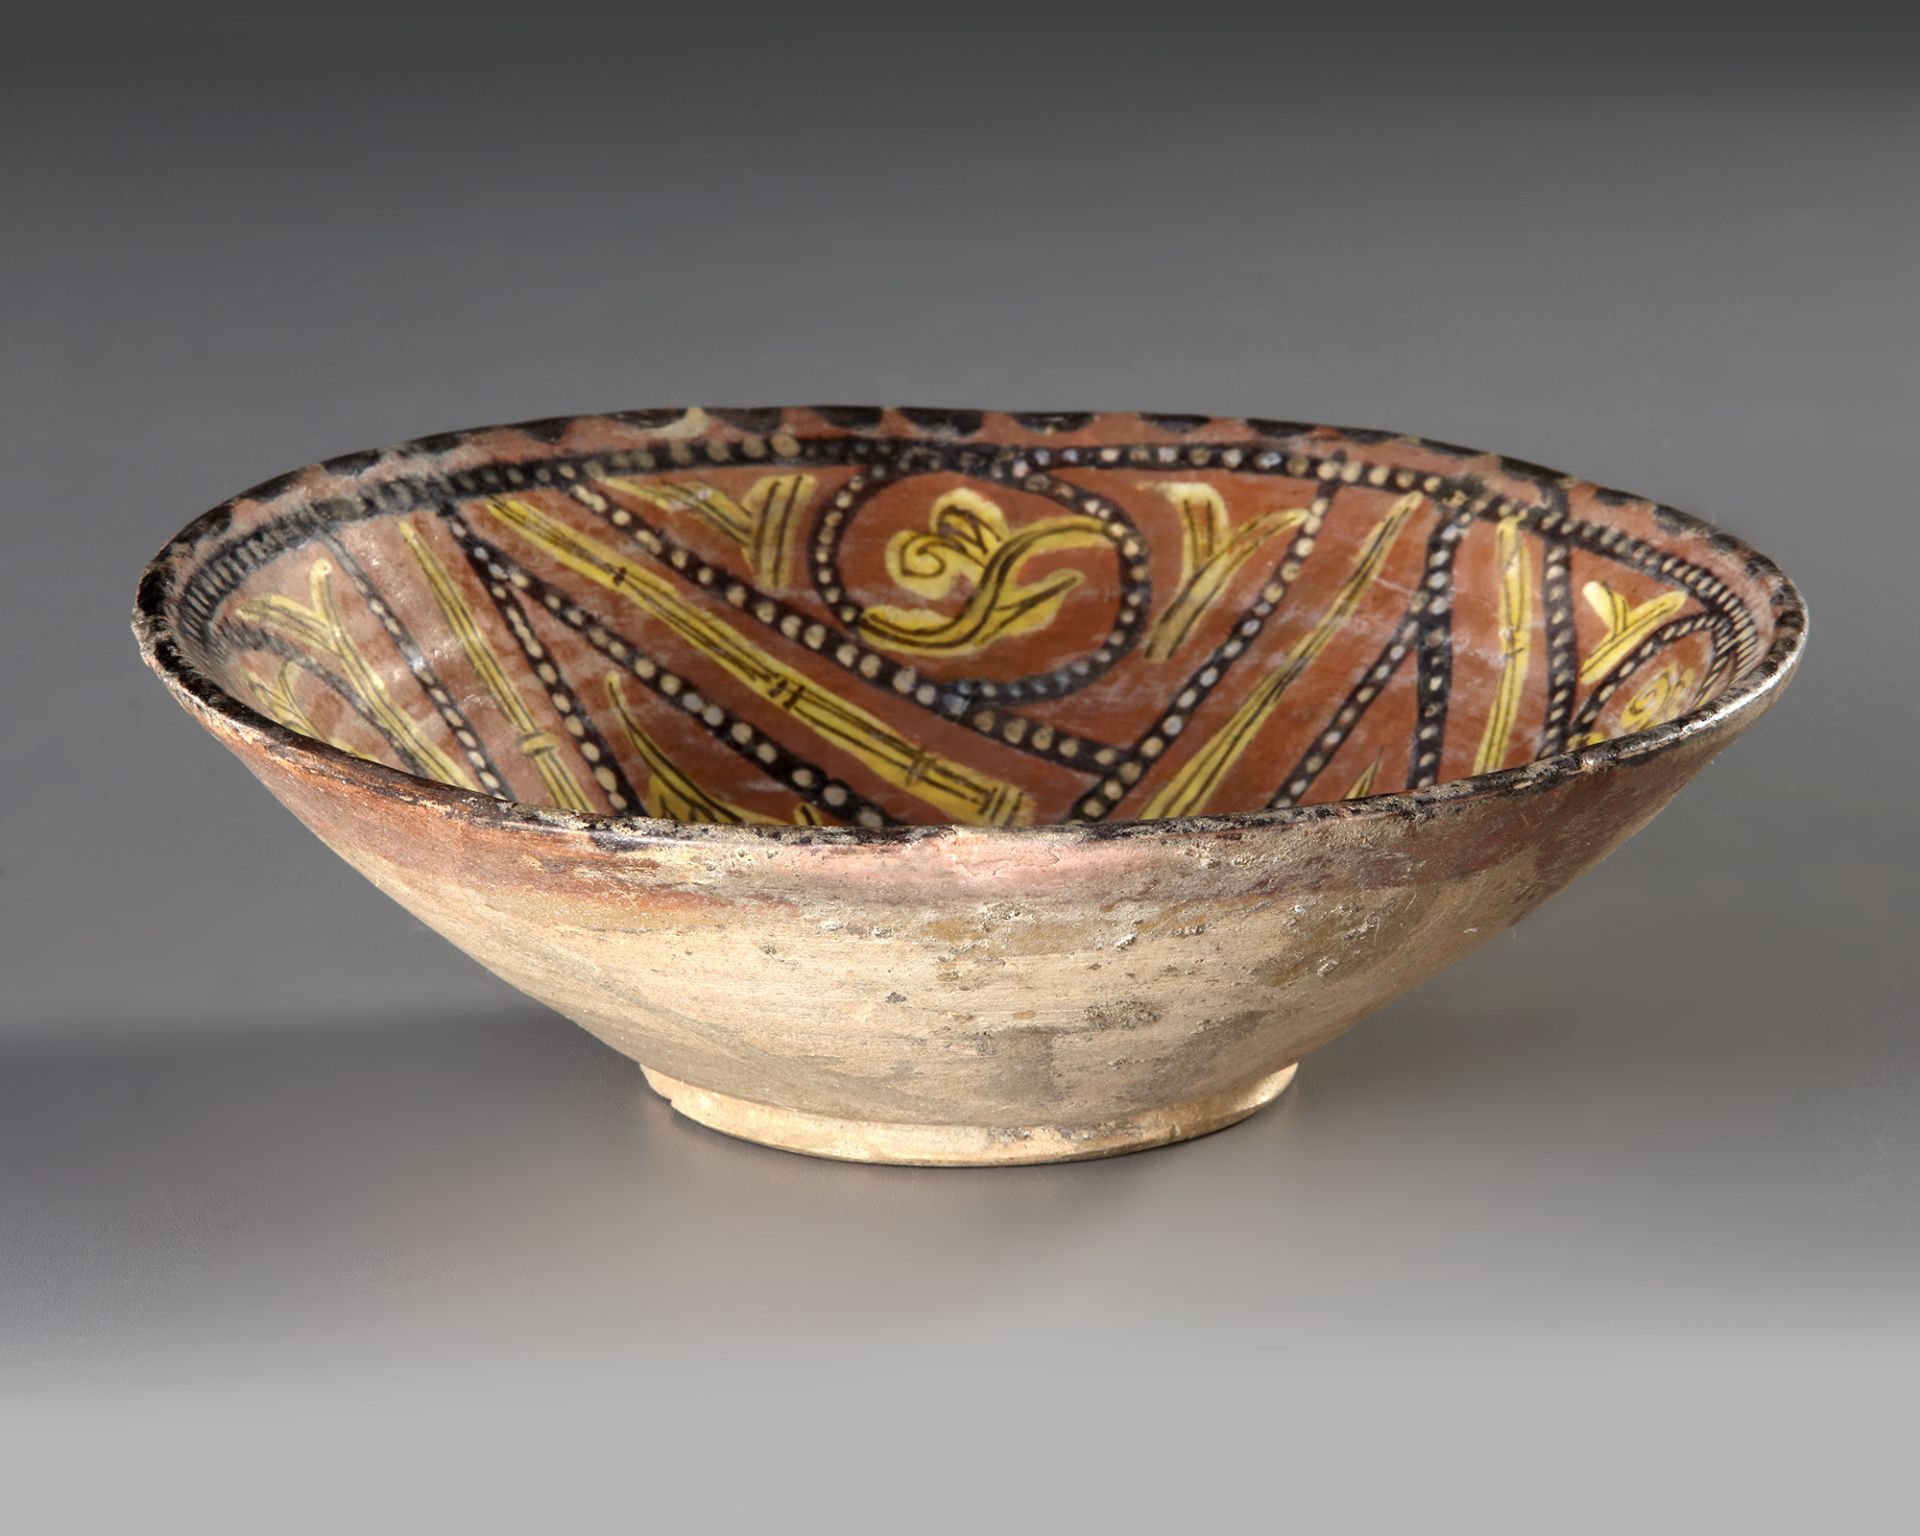 A NISHAPUR CONICAL POTTERY BOWL, PERSIA, 10TH CENTURY - Image 4 of 10